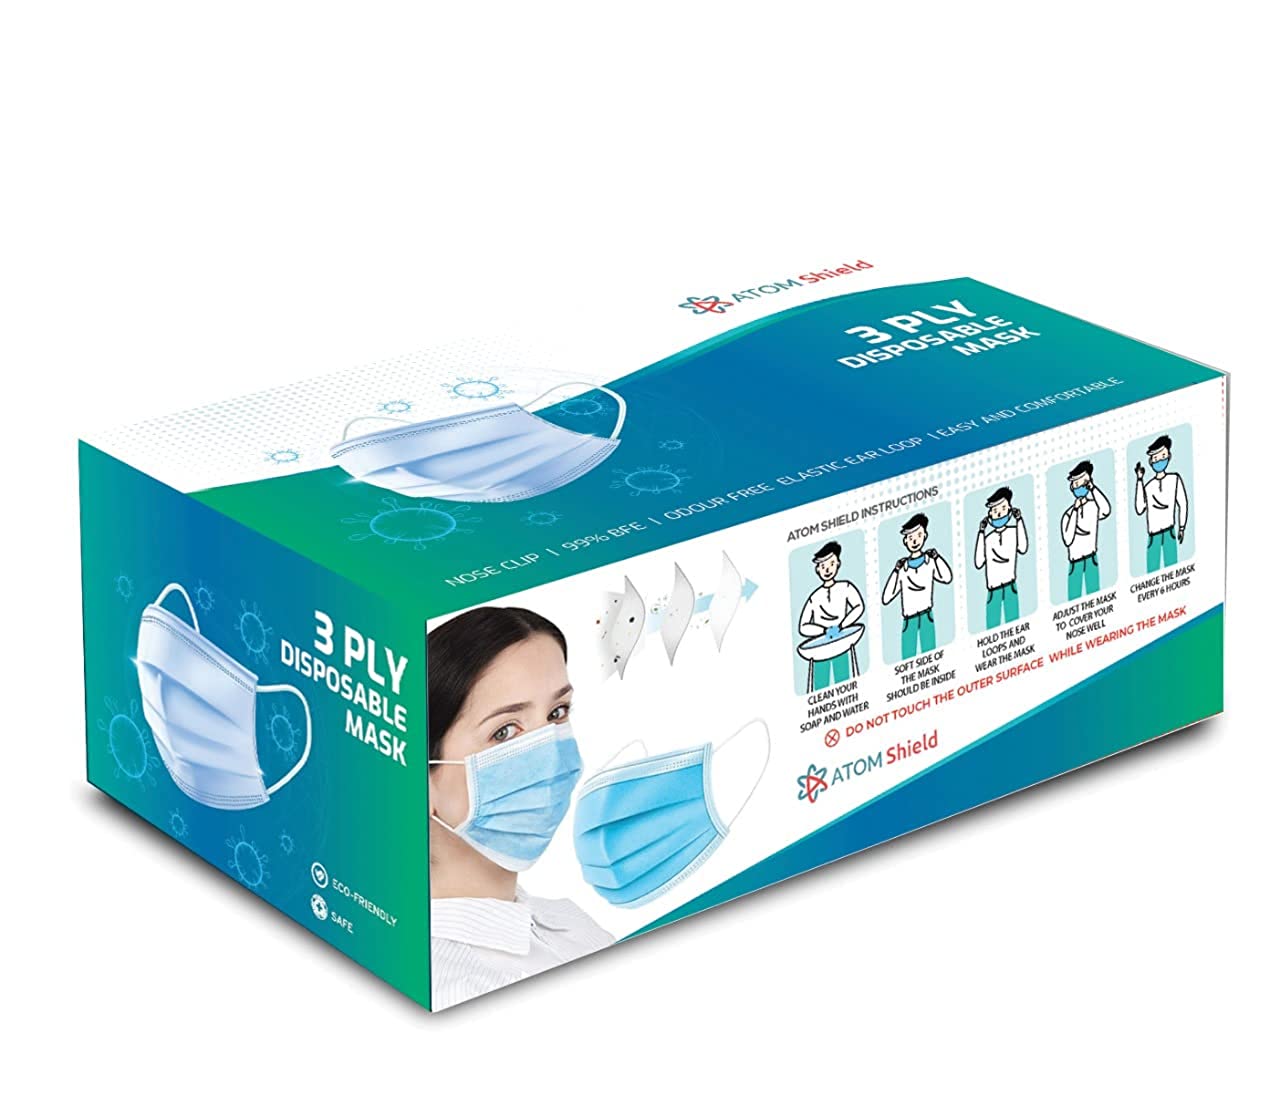 Ace Defence Earloop N95 Protective Face Mask 20 with ATOMshield 100 3 ply mask Double Mask Combo for Protection